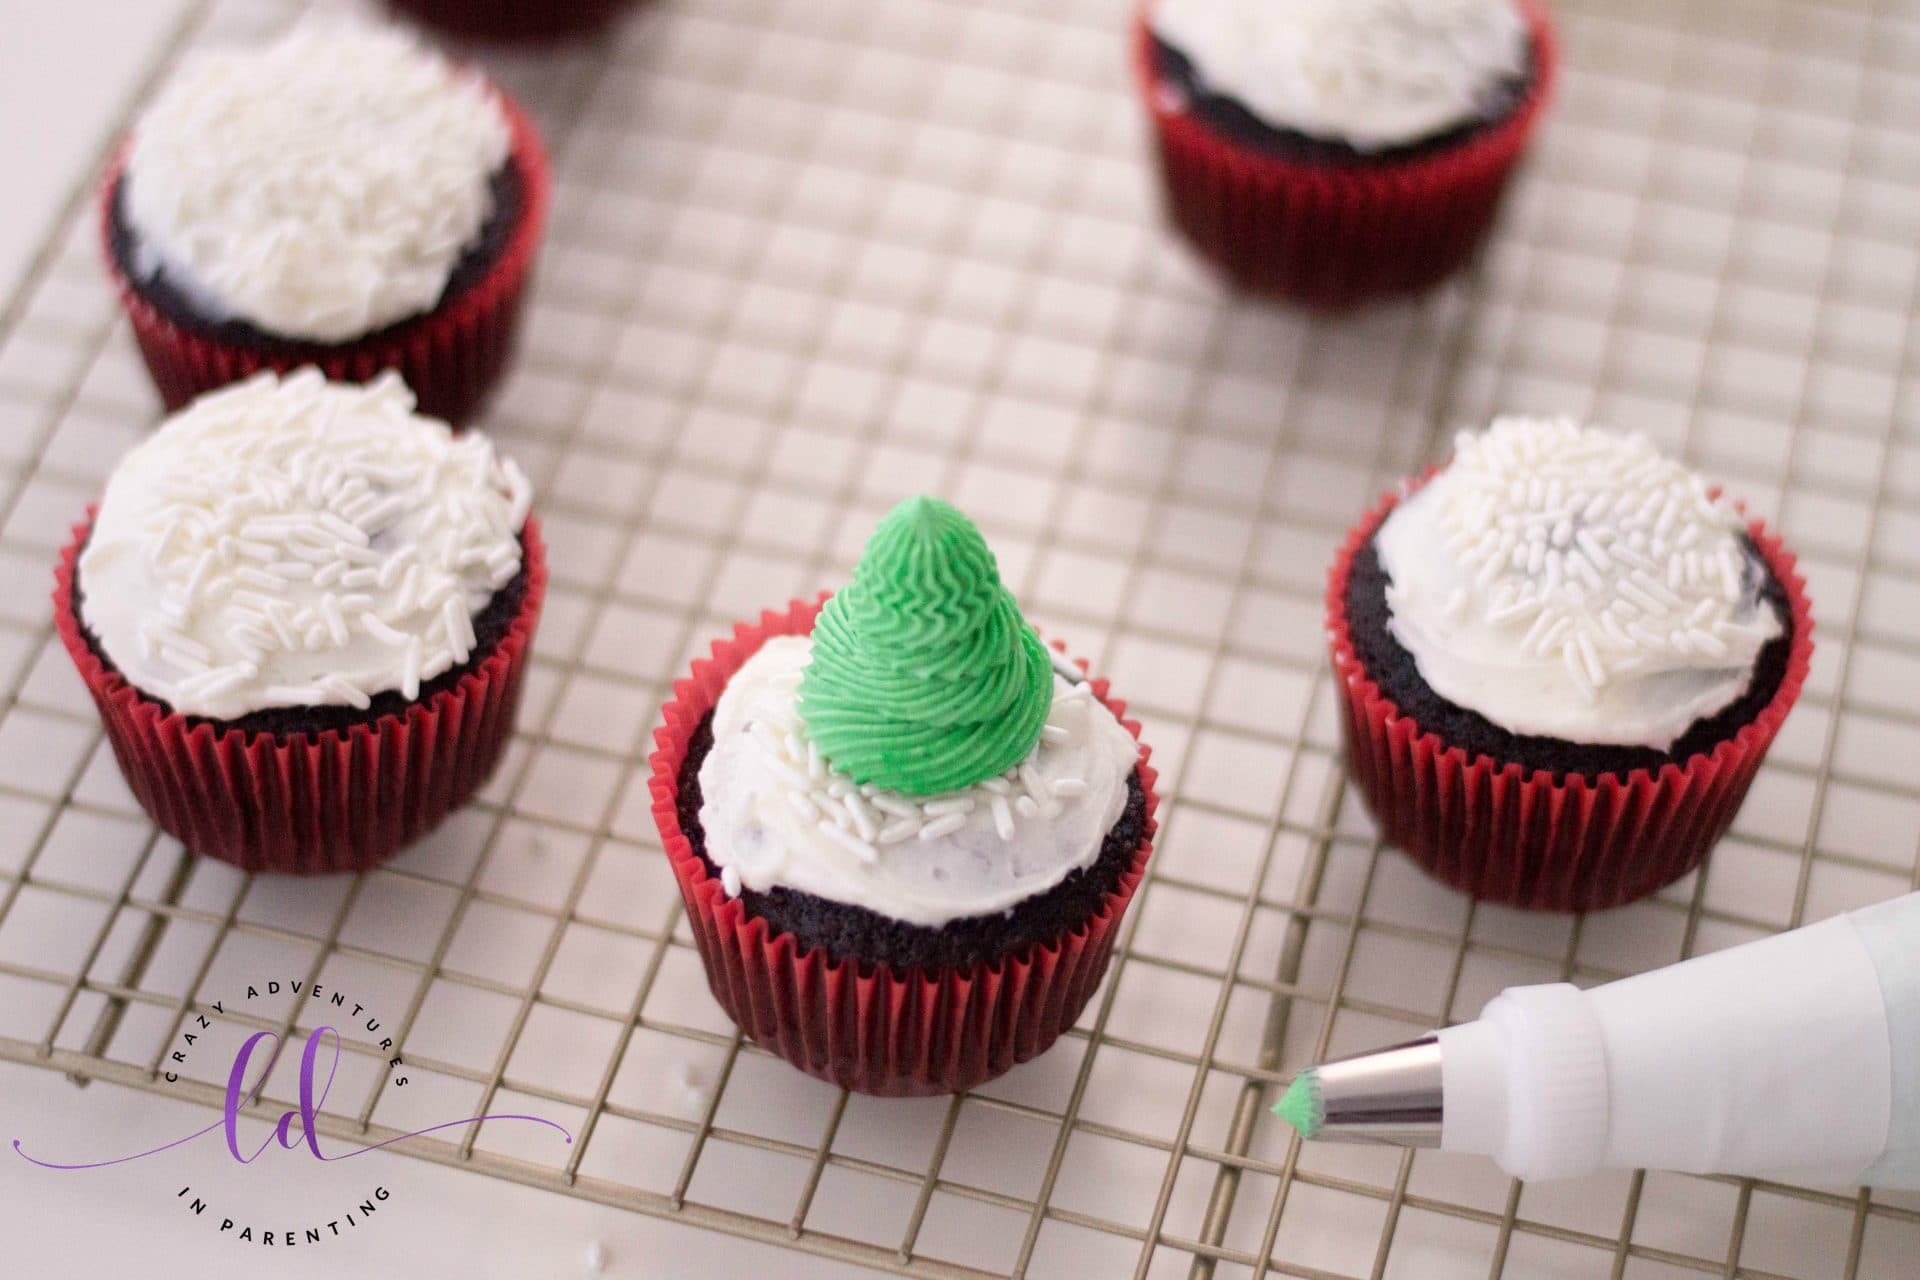 Christmas Tree Piped onto Cupcakes with Buttercream Frosting